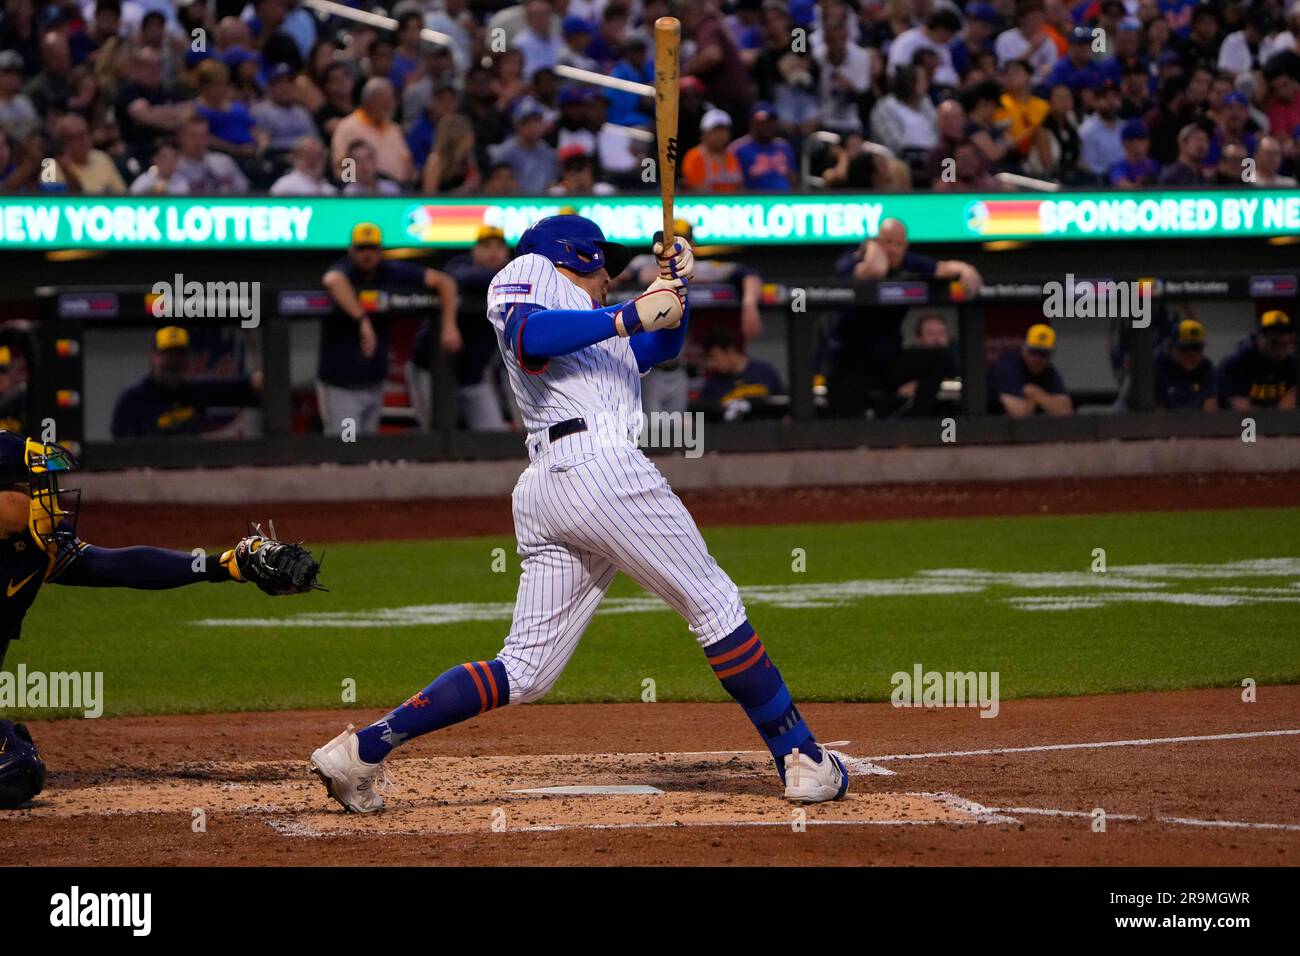 FLUSHING, NY - JUNE 27: New York Mets Center Fielder Brandon Nimmo (9) hits  a home run during the fourth inning of a Major League Baseball game between  the Milwaukee Brewers and